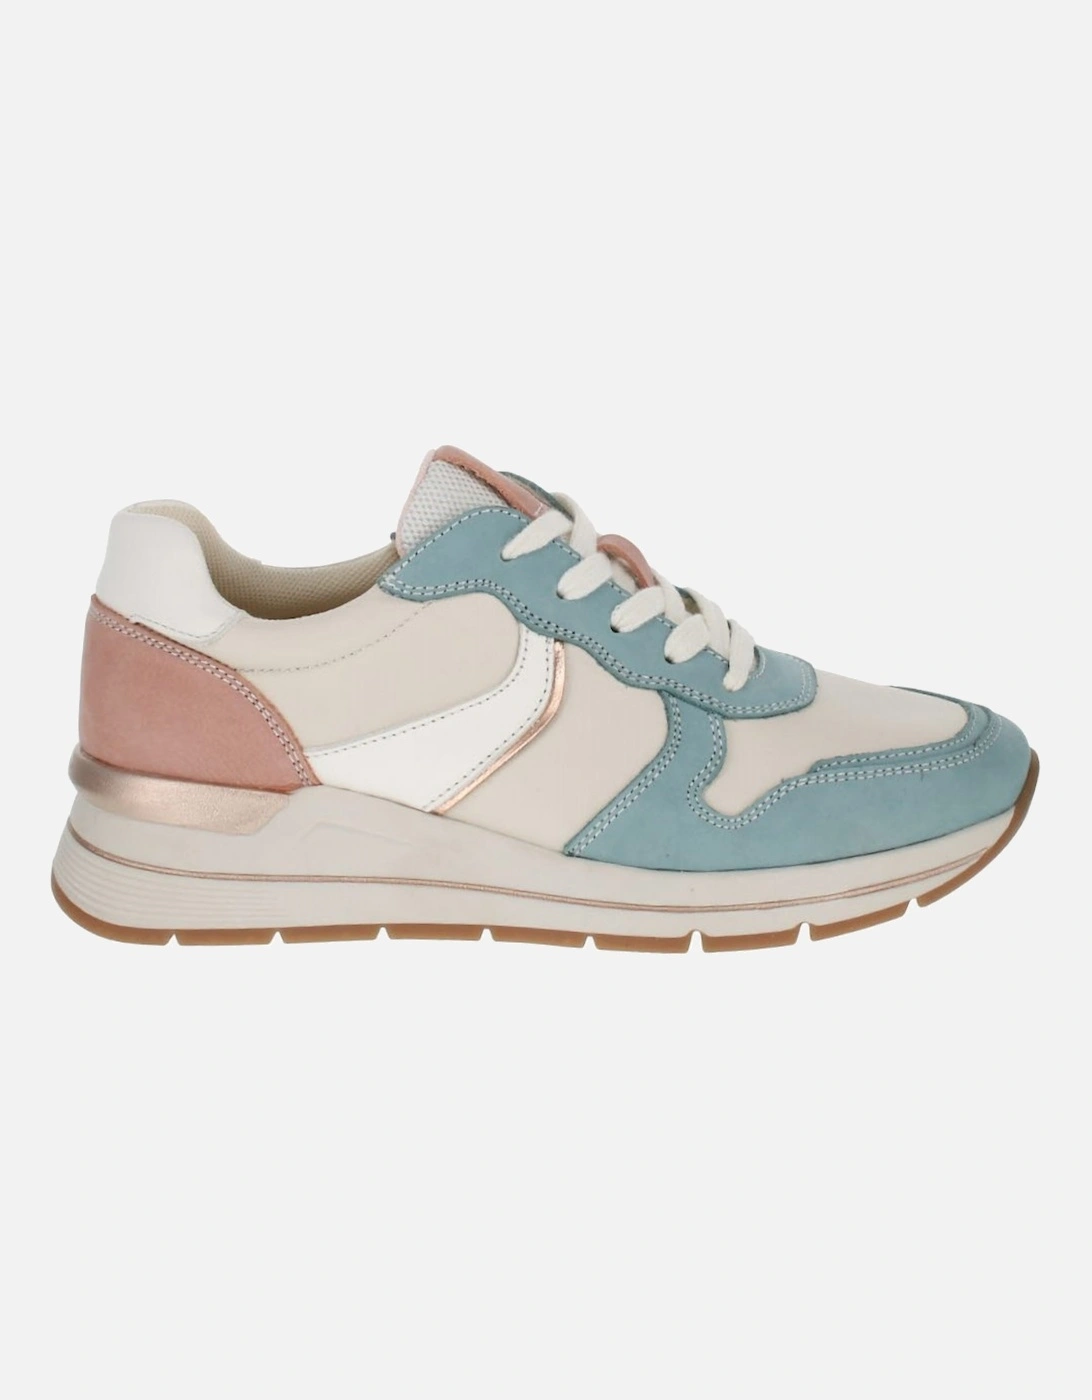 Evie 01 Womens Trainers